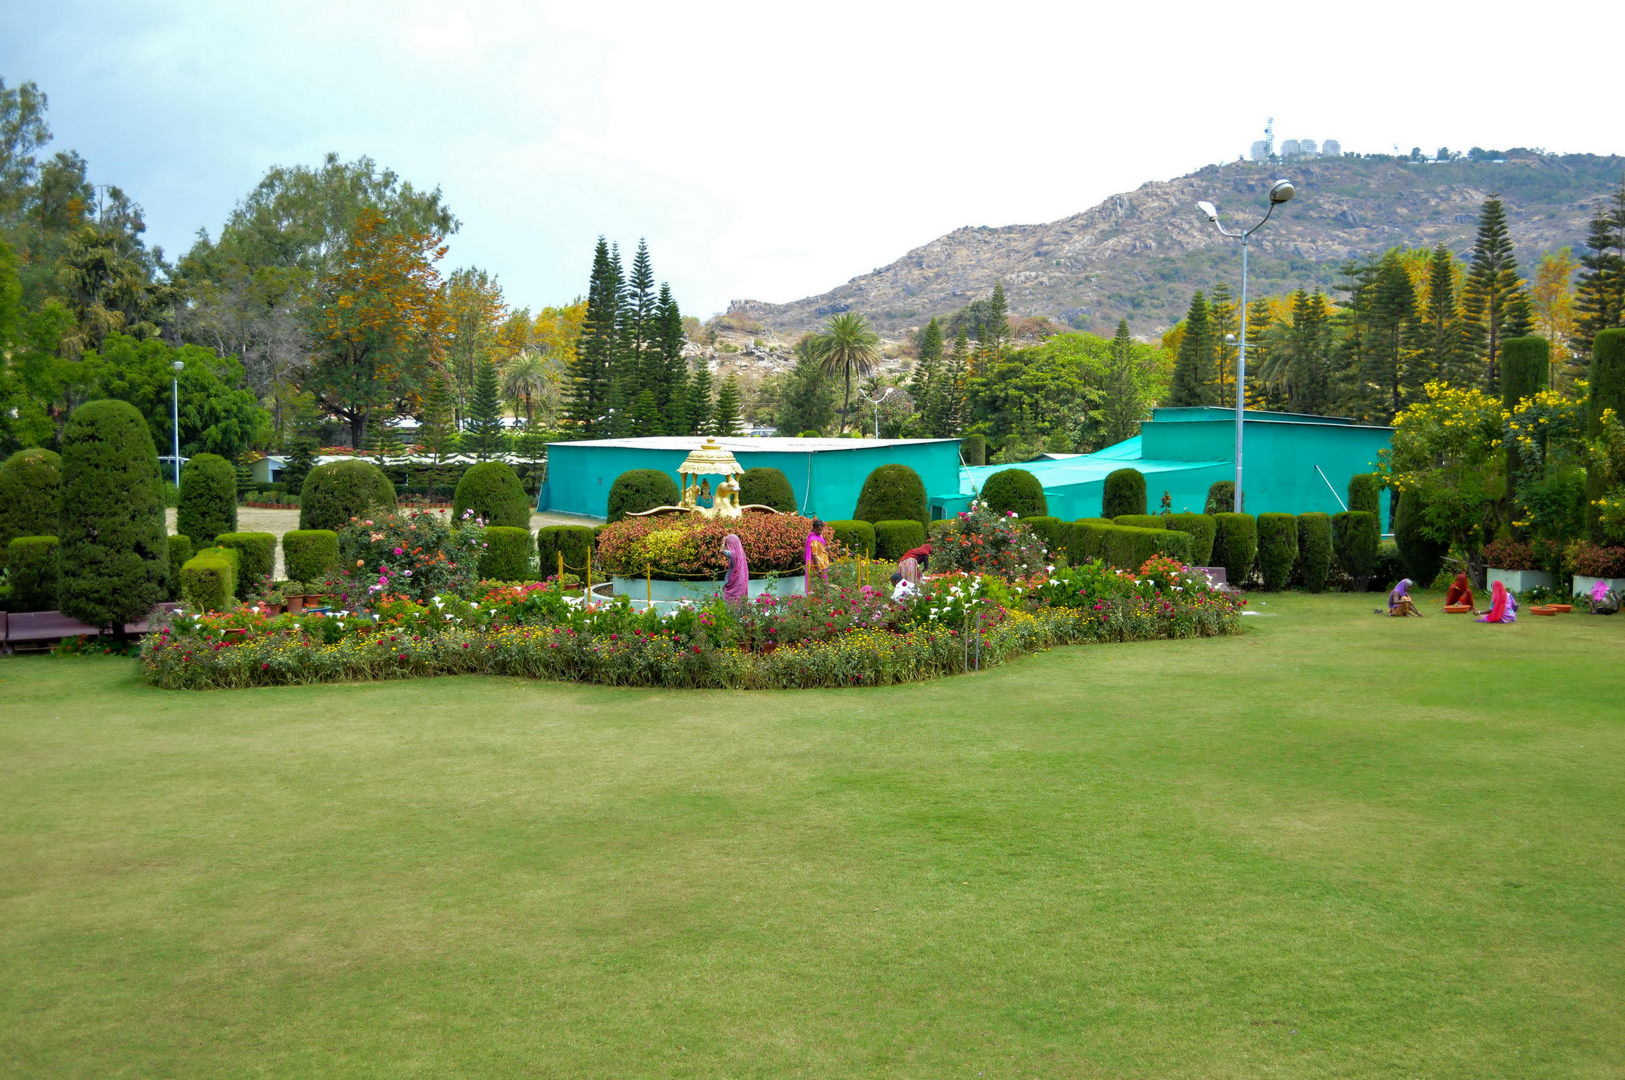 Mount Abu Attractions